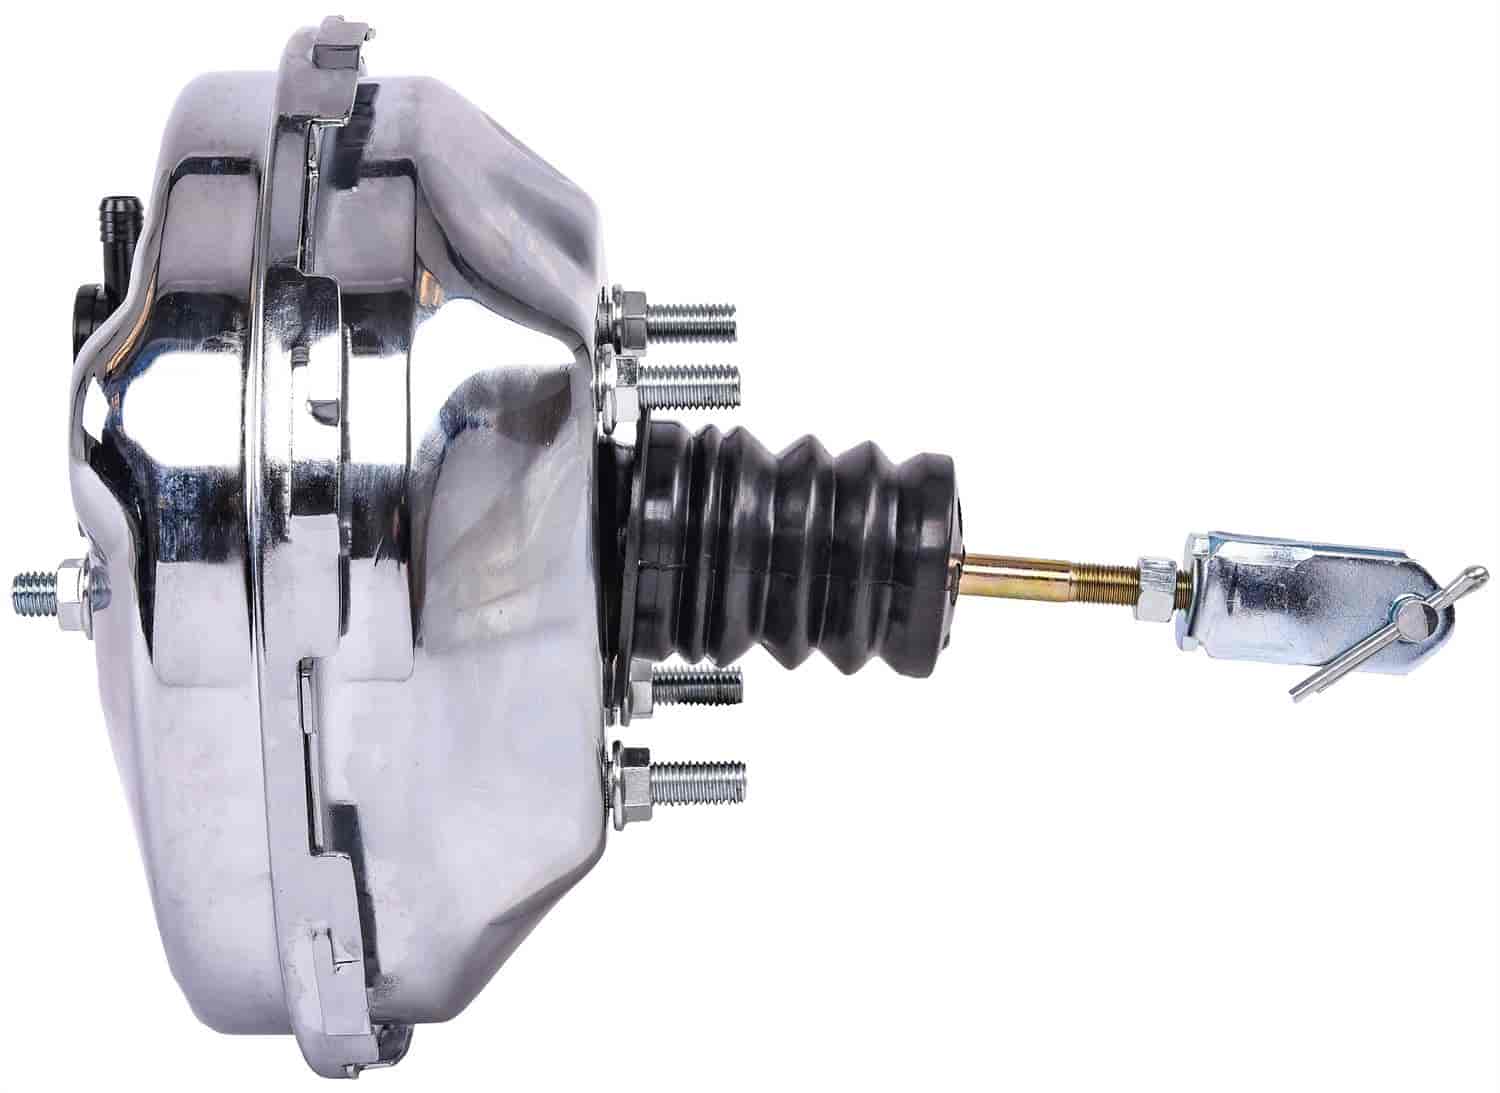 Power Brake Booster for 1964-1972 GM Cars [9 in. Single Diaphragm]